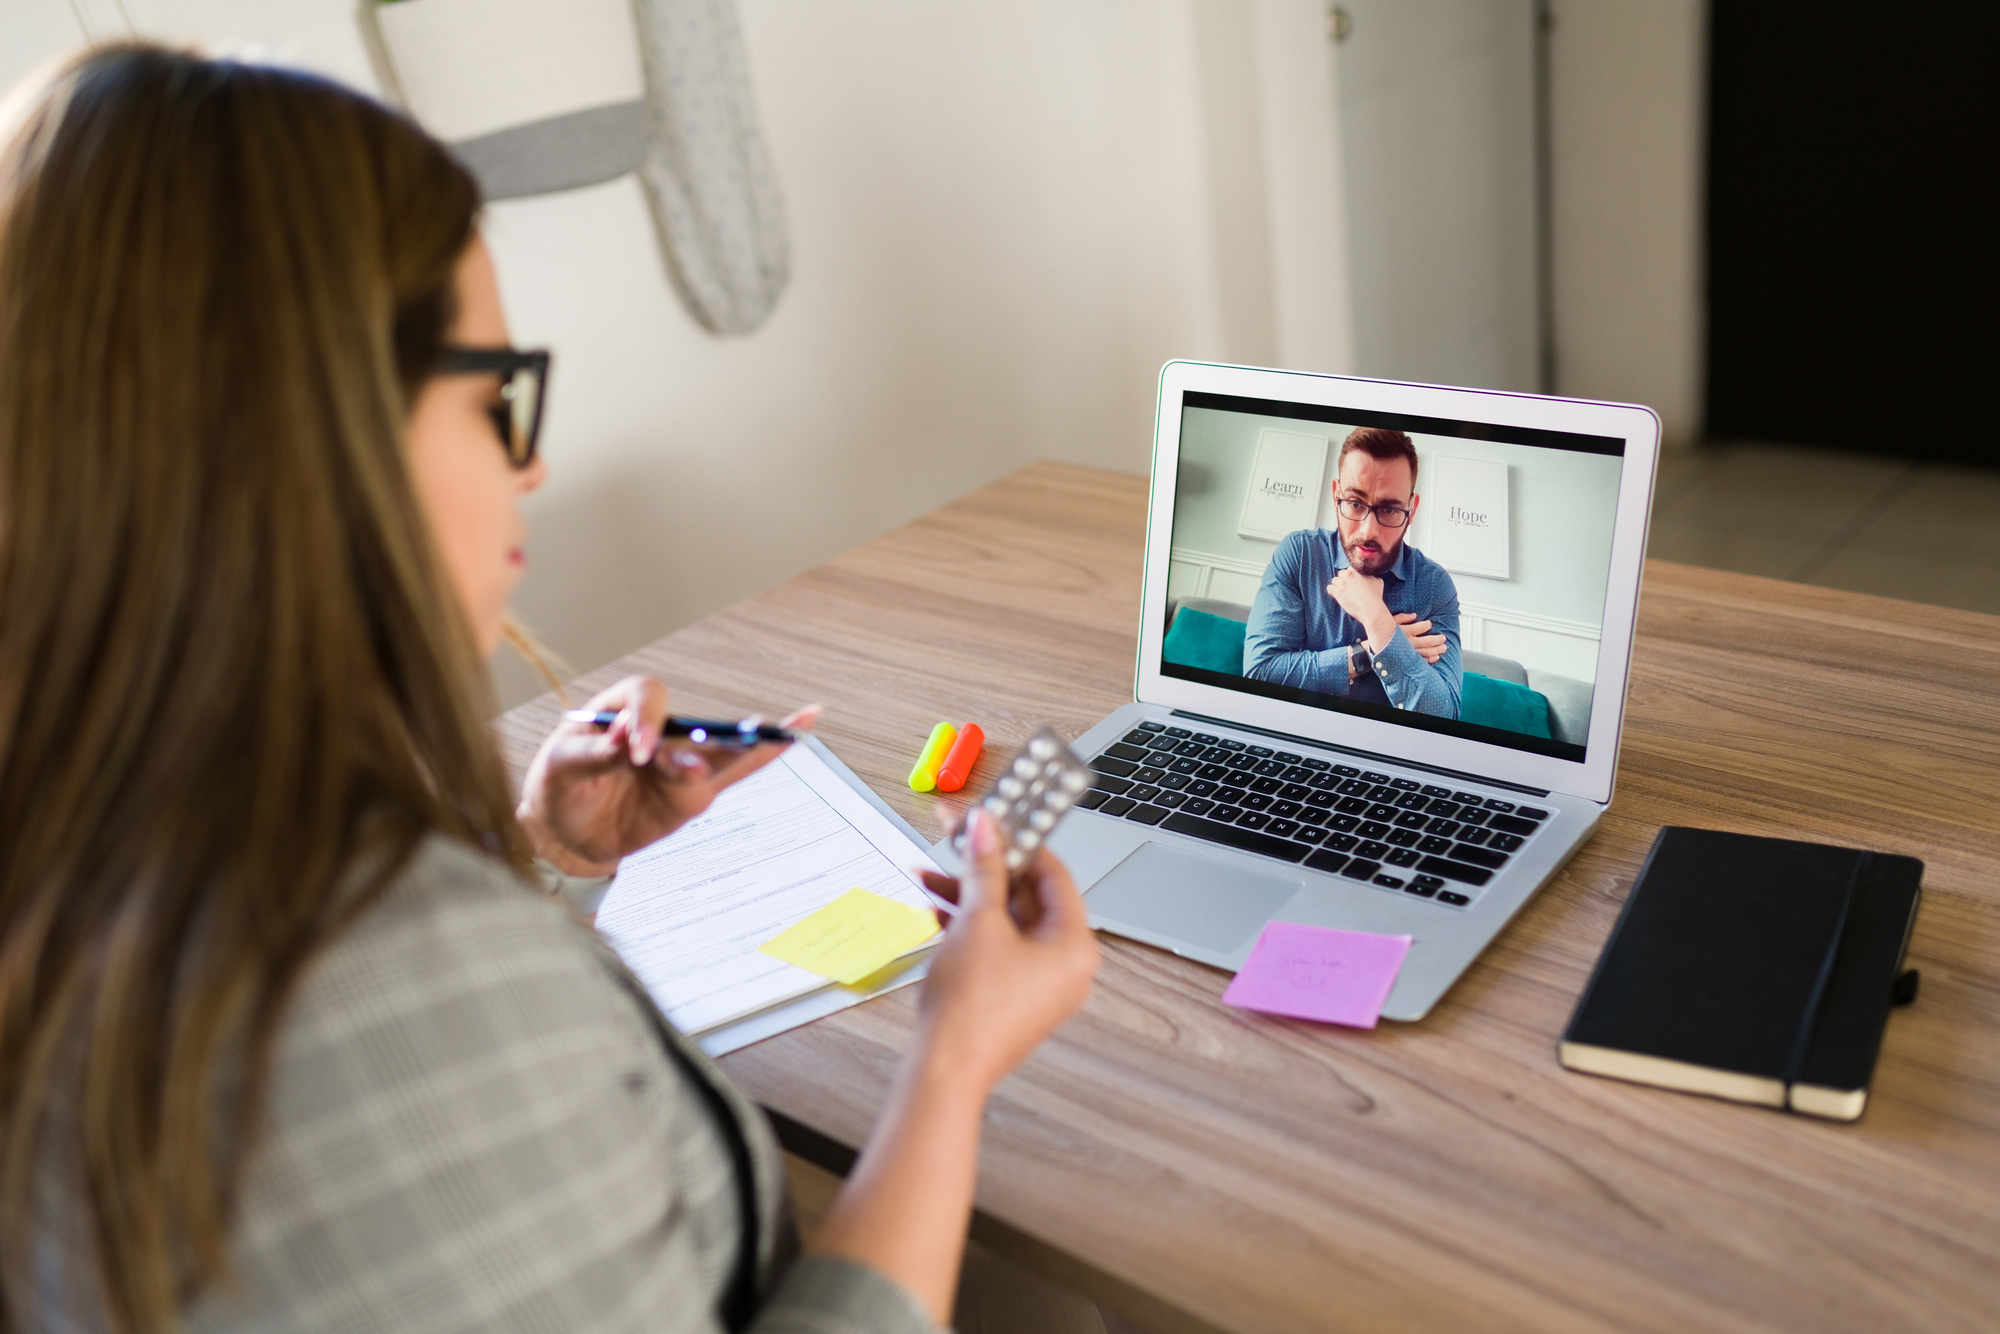 Female psychiatrist giving a medical prescription pills and antidepressants to a depressed male patient during a video call